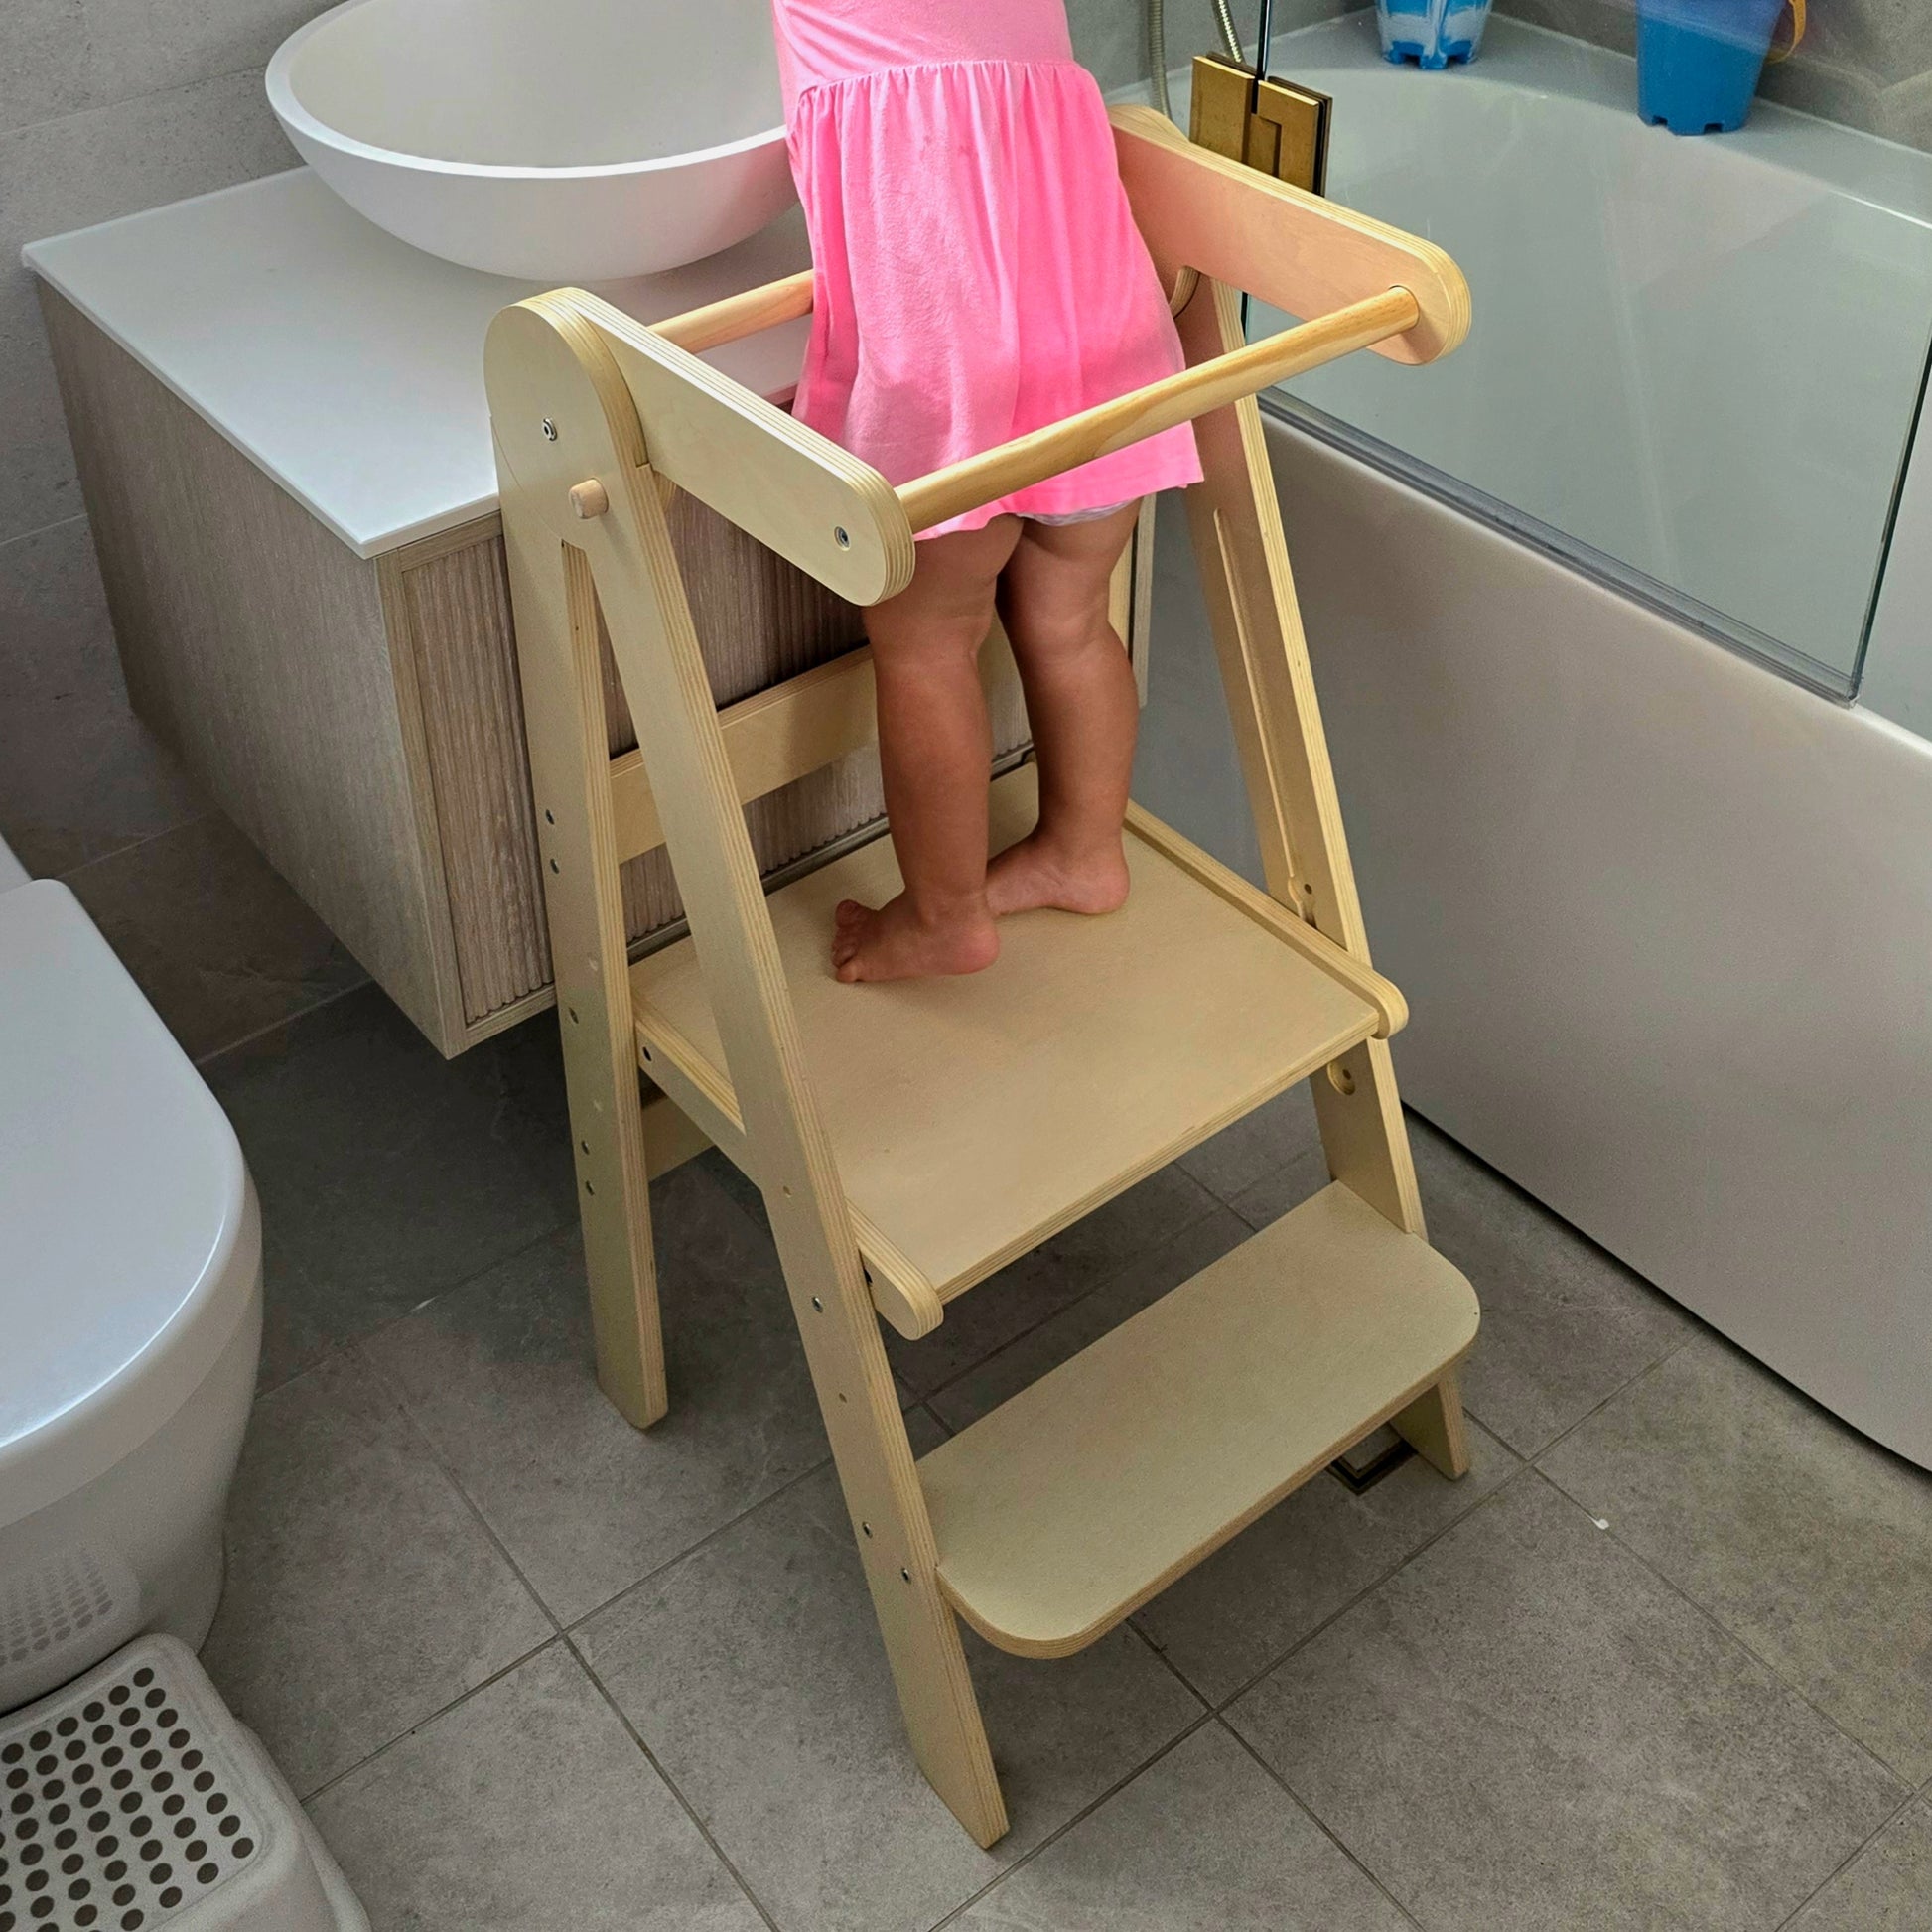 Toddler standing on Four Little Monkeys Natural Adjustable Foldable Learning Tower, washing hands at a bathroom sink.